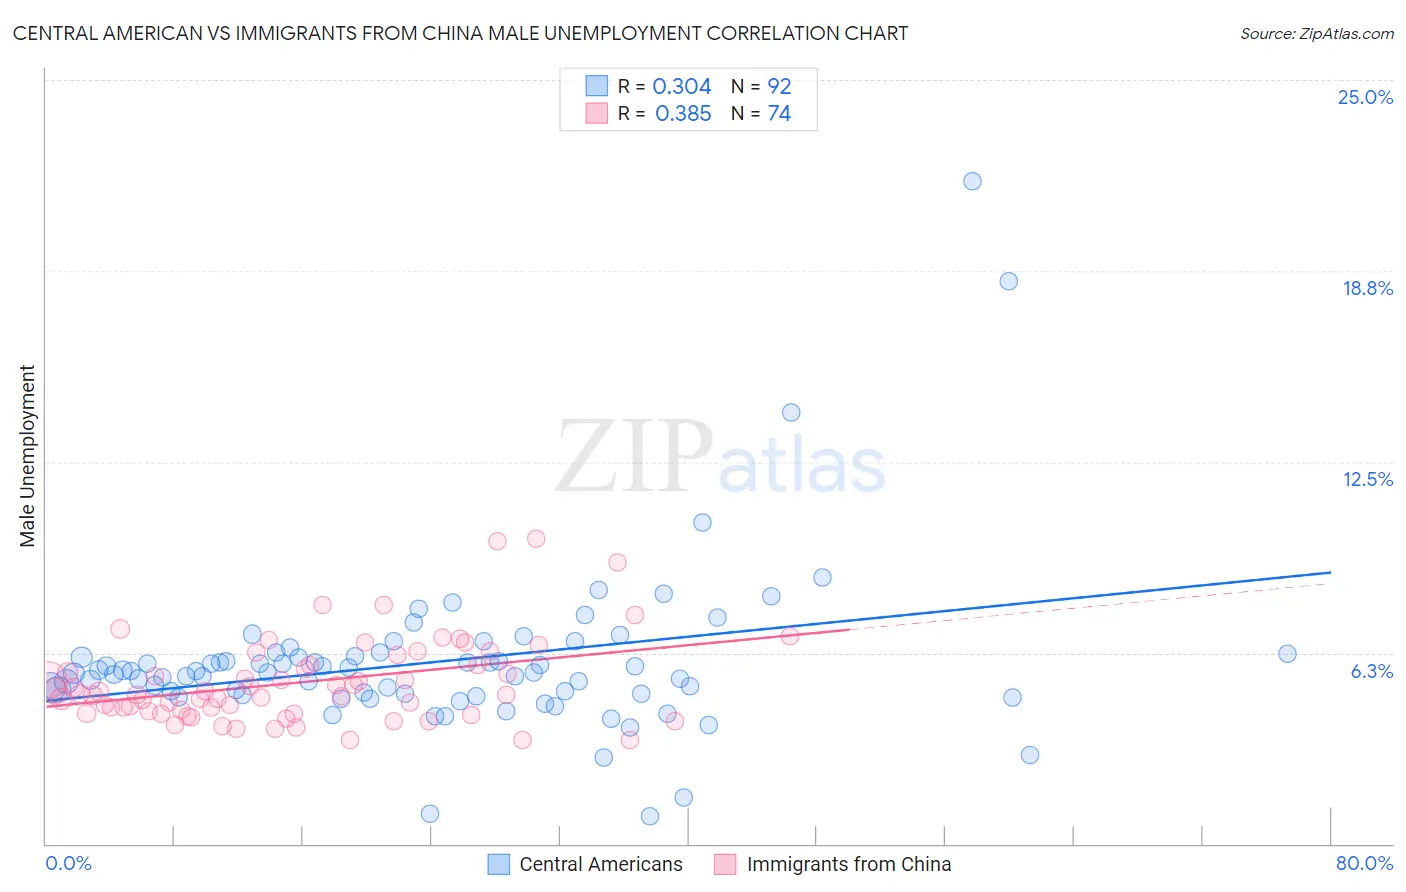 Central American vs Immigrants from China Male Unemployment